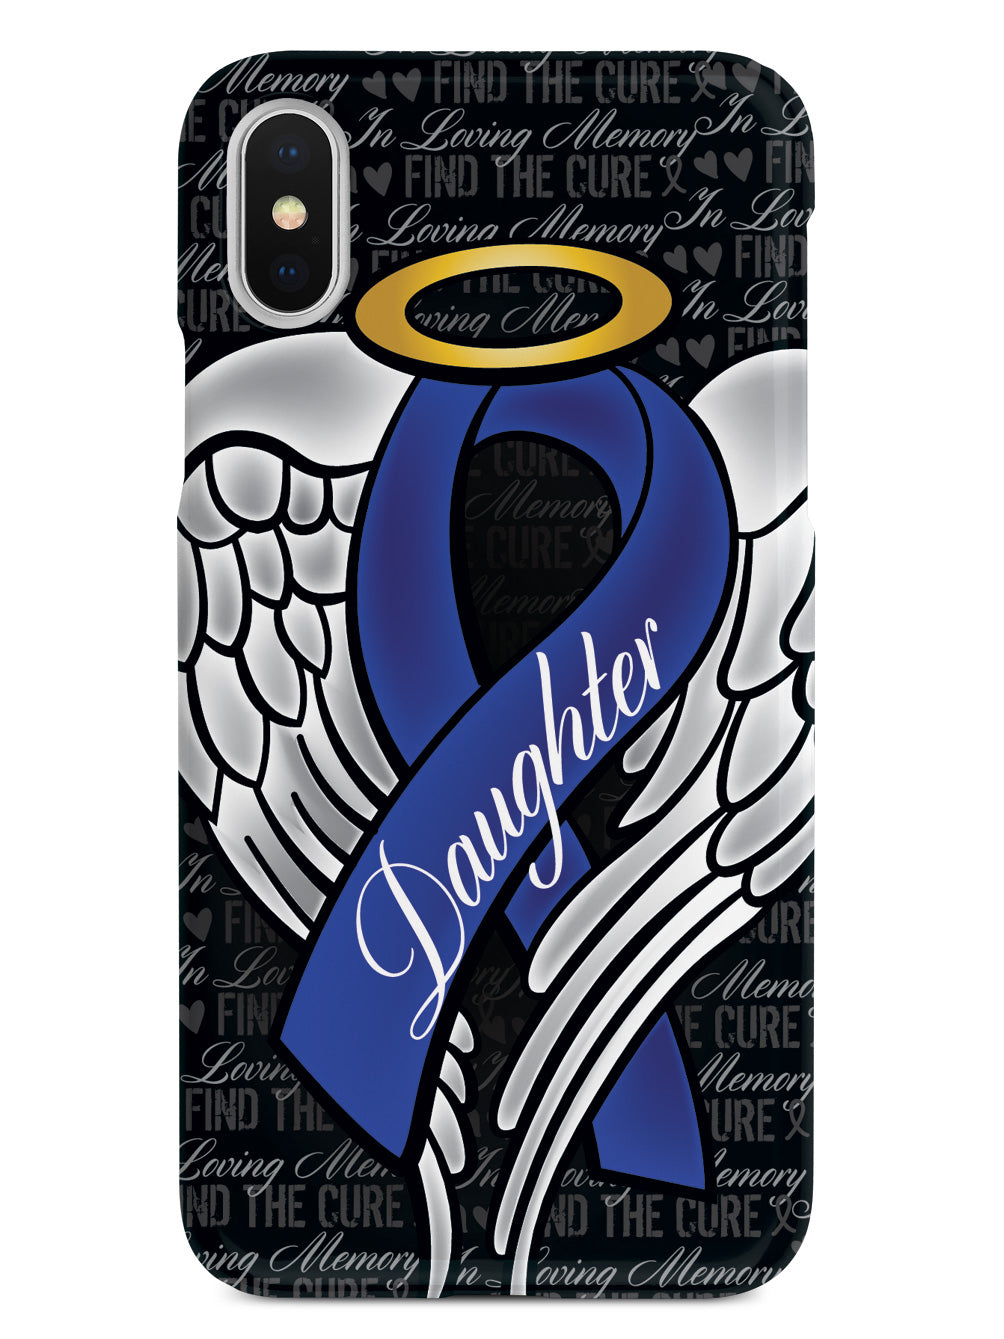 In Loving Memory of My Daughter - Blue Ribbon Case